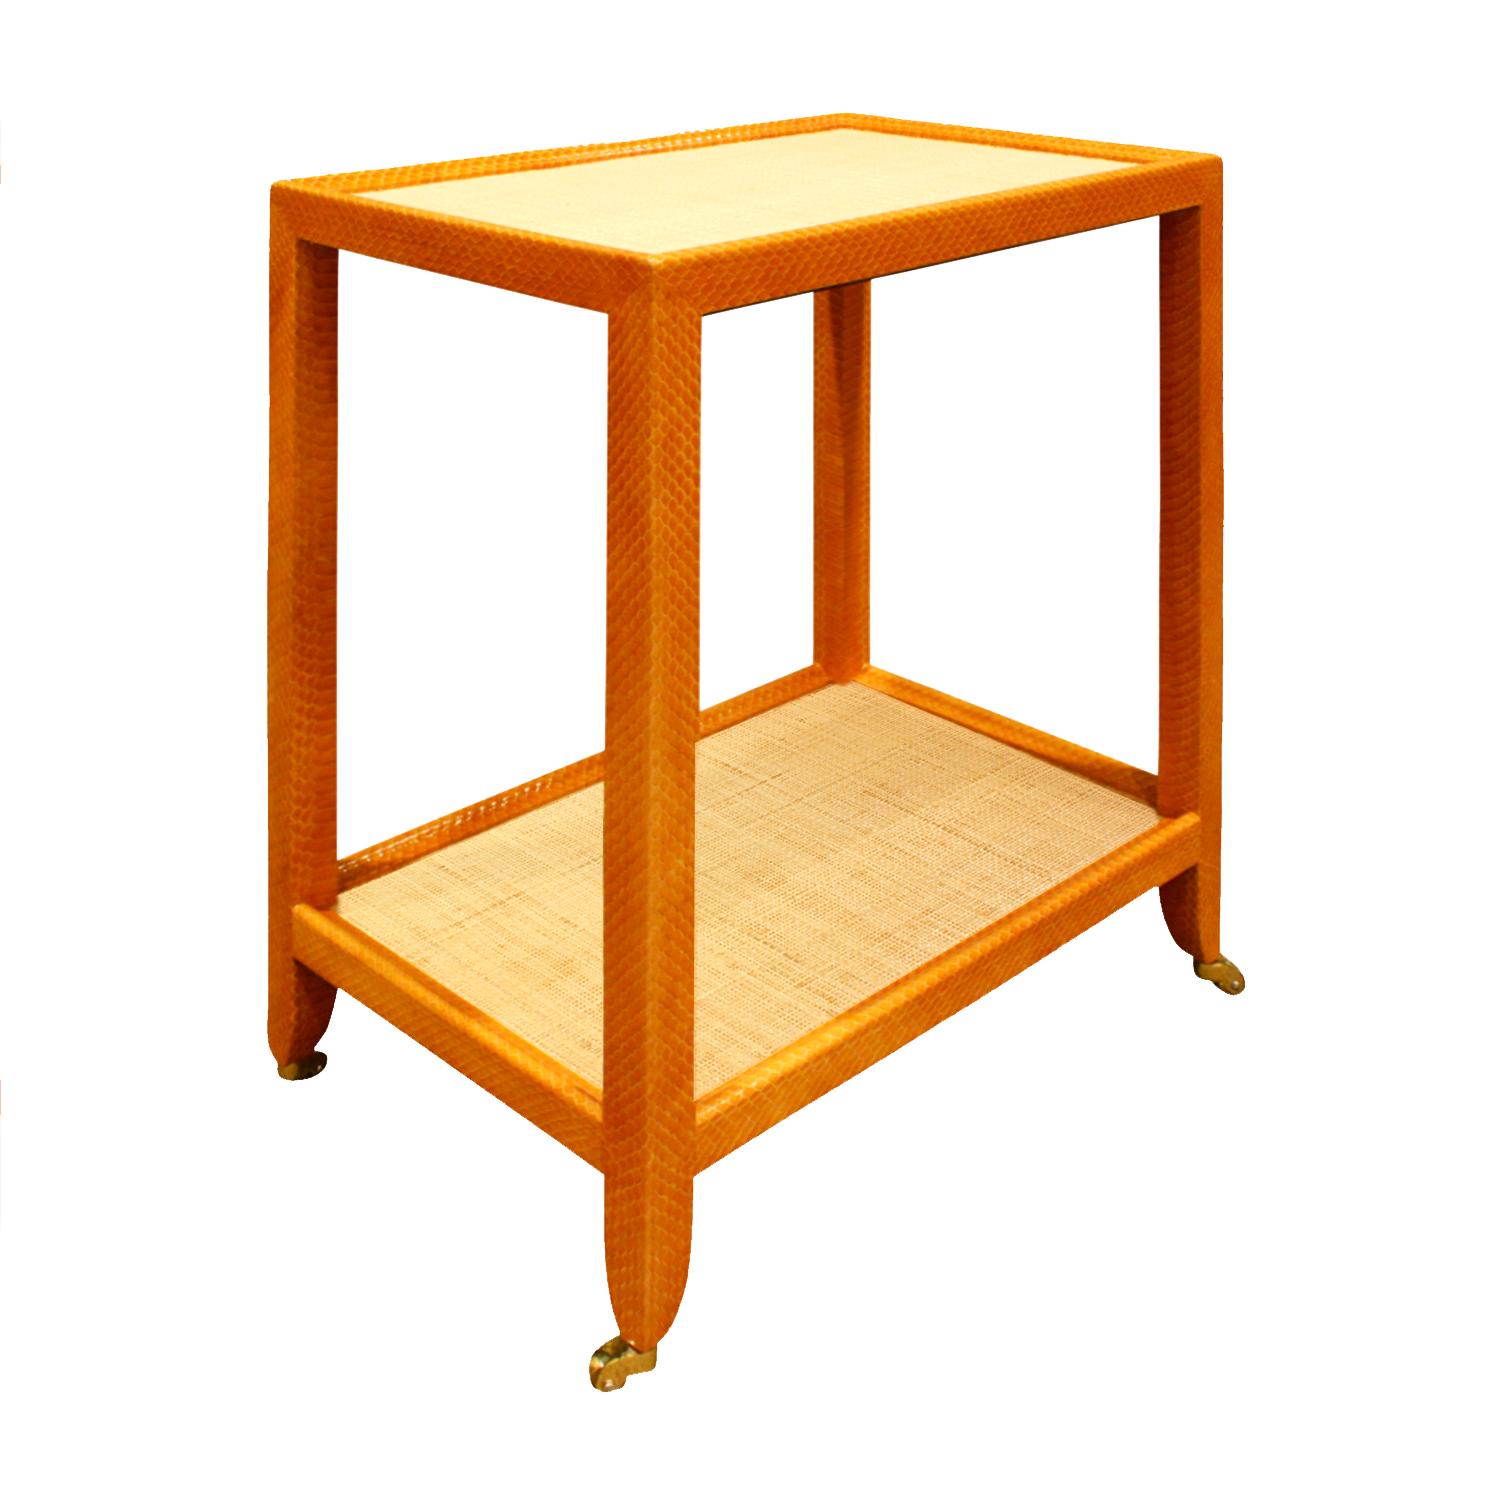 Telephone table covered in apricot python with natural Madagascar cloth tops on polished brass castors by Mary Forssberg, American 2019 (signed). This table is meticulously crafted and the combination of materials is very chic.